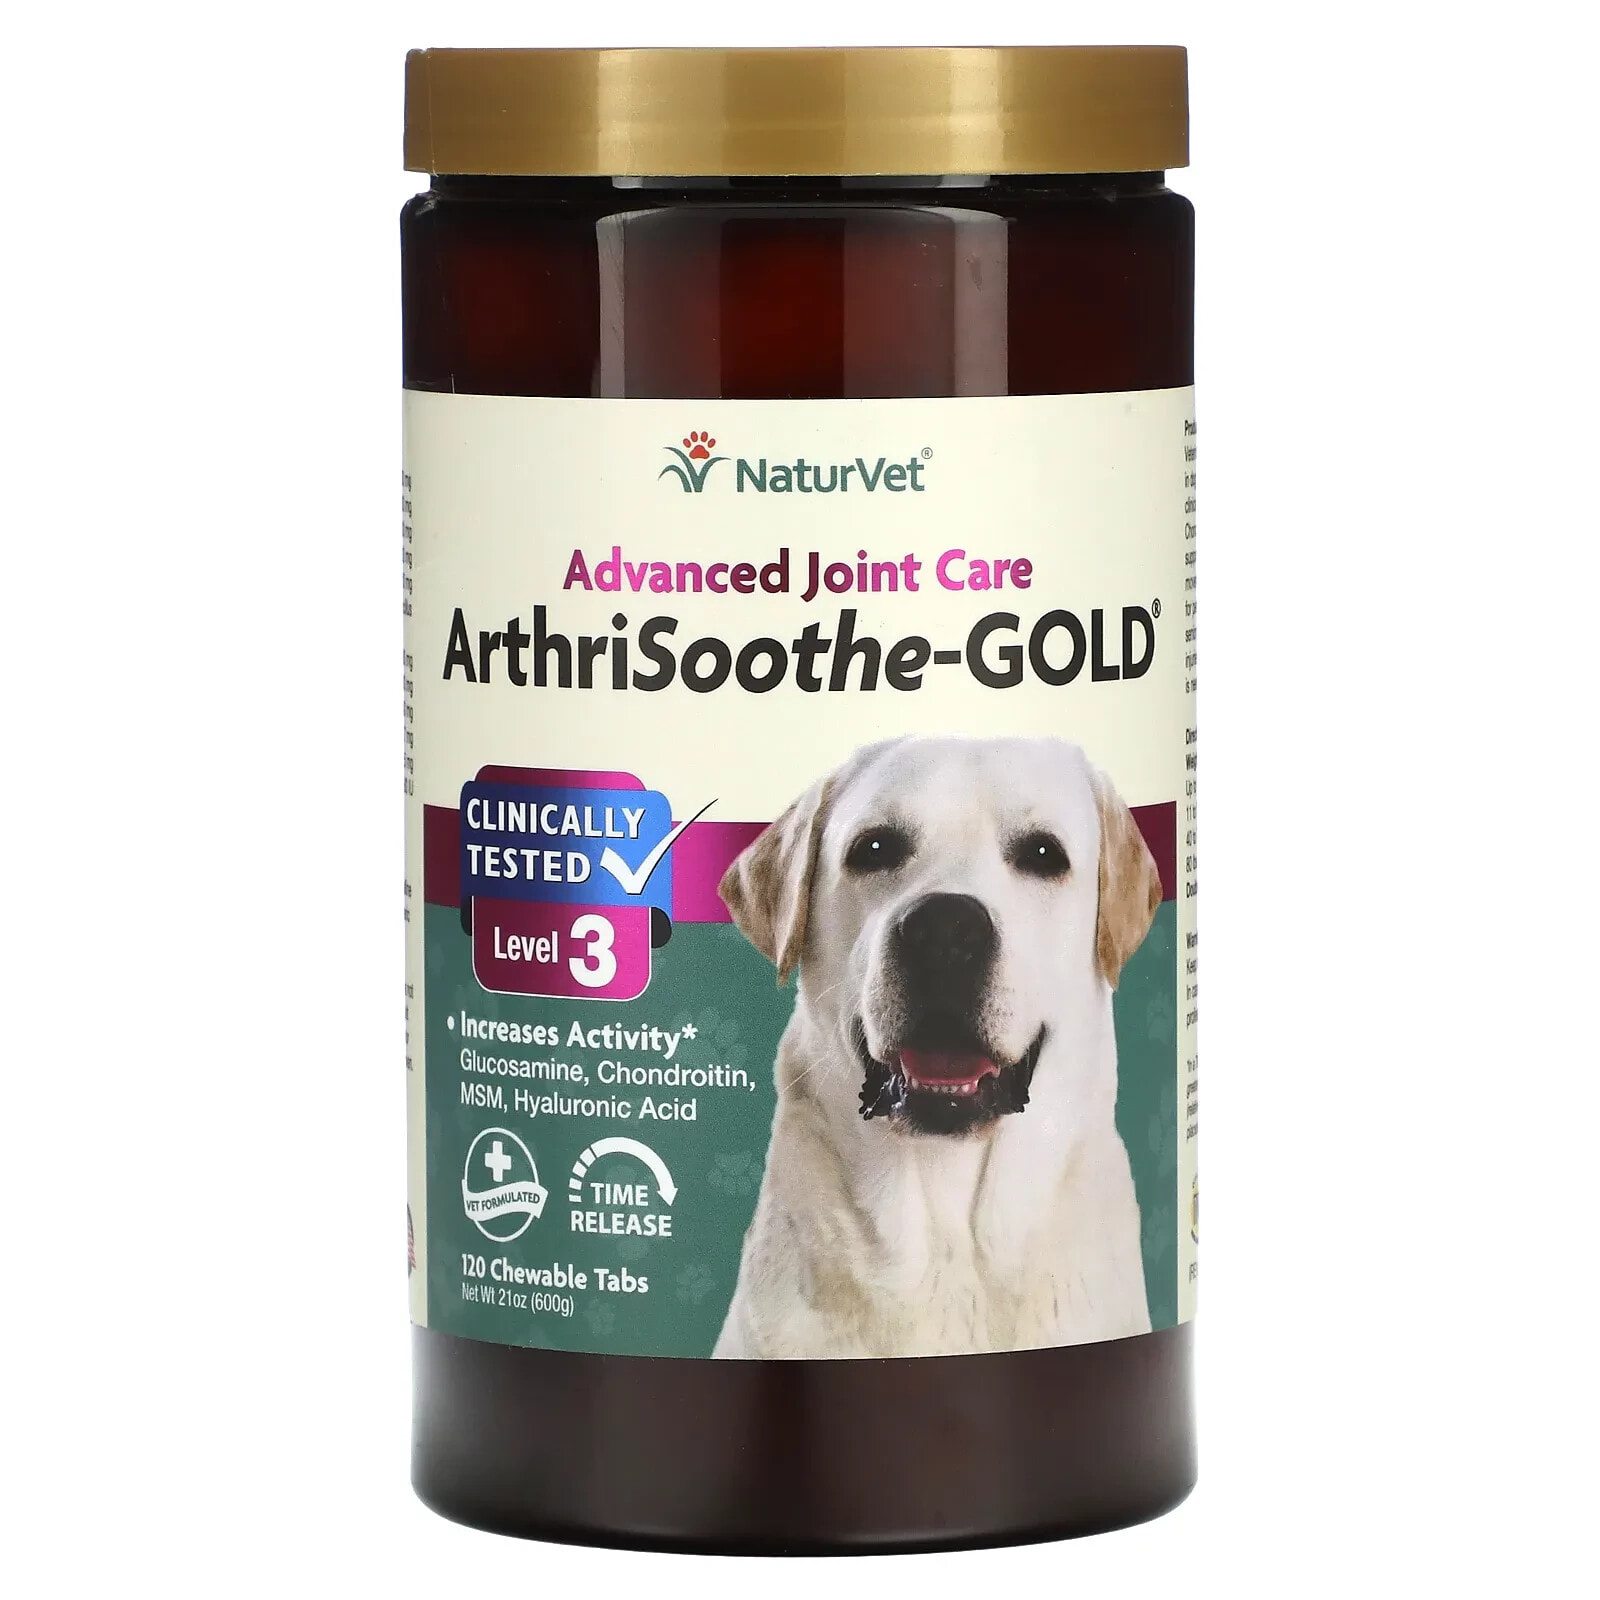 NaturVet, ArthriSoothe-GOLD, Advanced Joint Care, For Dogs & Cats, Level 3, 21 oz (600 g), 120 Chewable Tabs